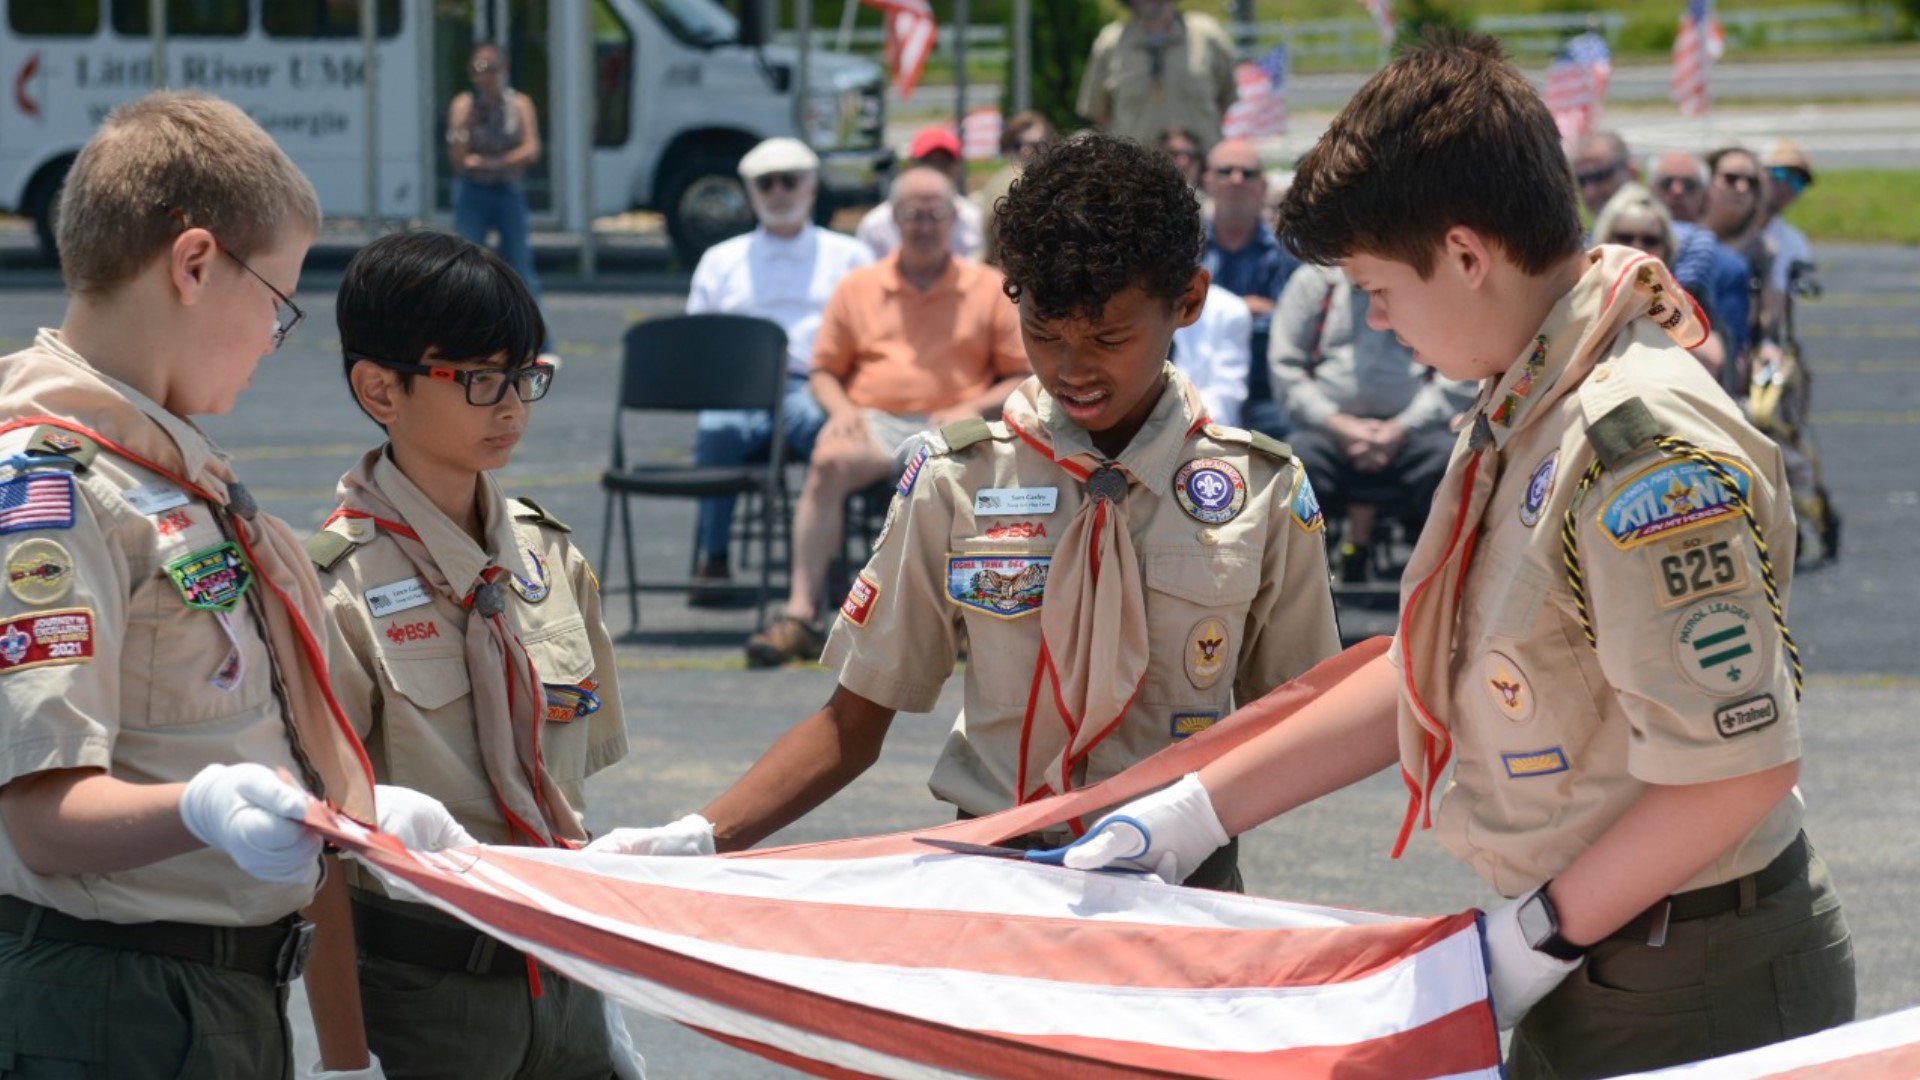 A Cherokee County Boy Scout troop is honoring our fallen heroes on Memorial Day through a special display up through Tuesday.